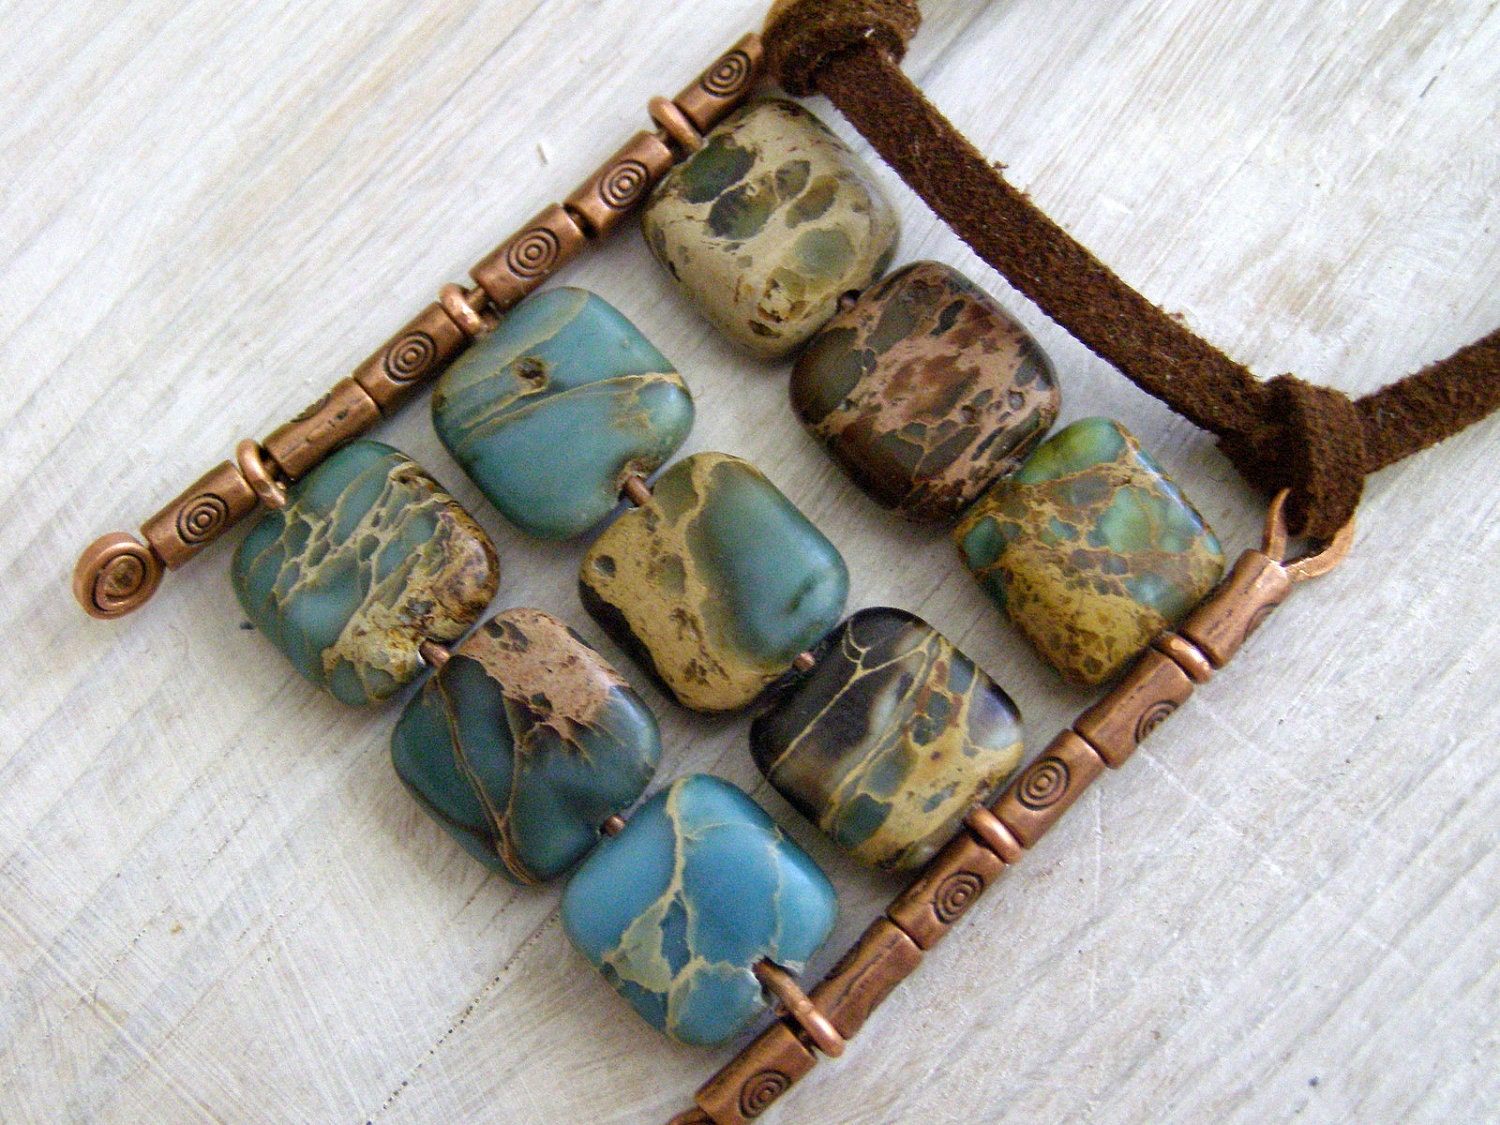 Nine squares pendant tile natural blue green mint turquoise gemstone on suede casual necklace Israel art made in Israel